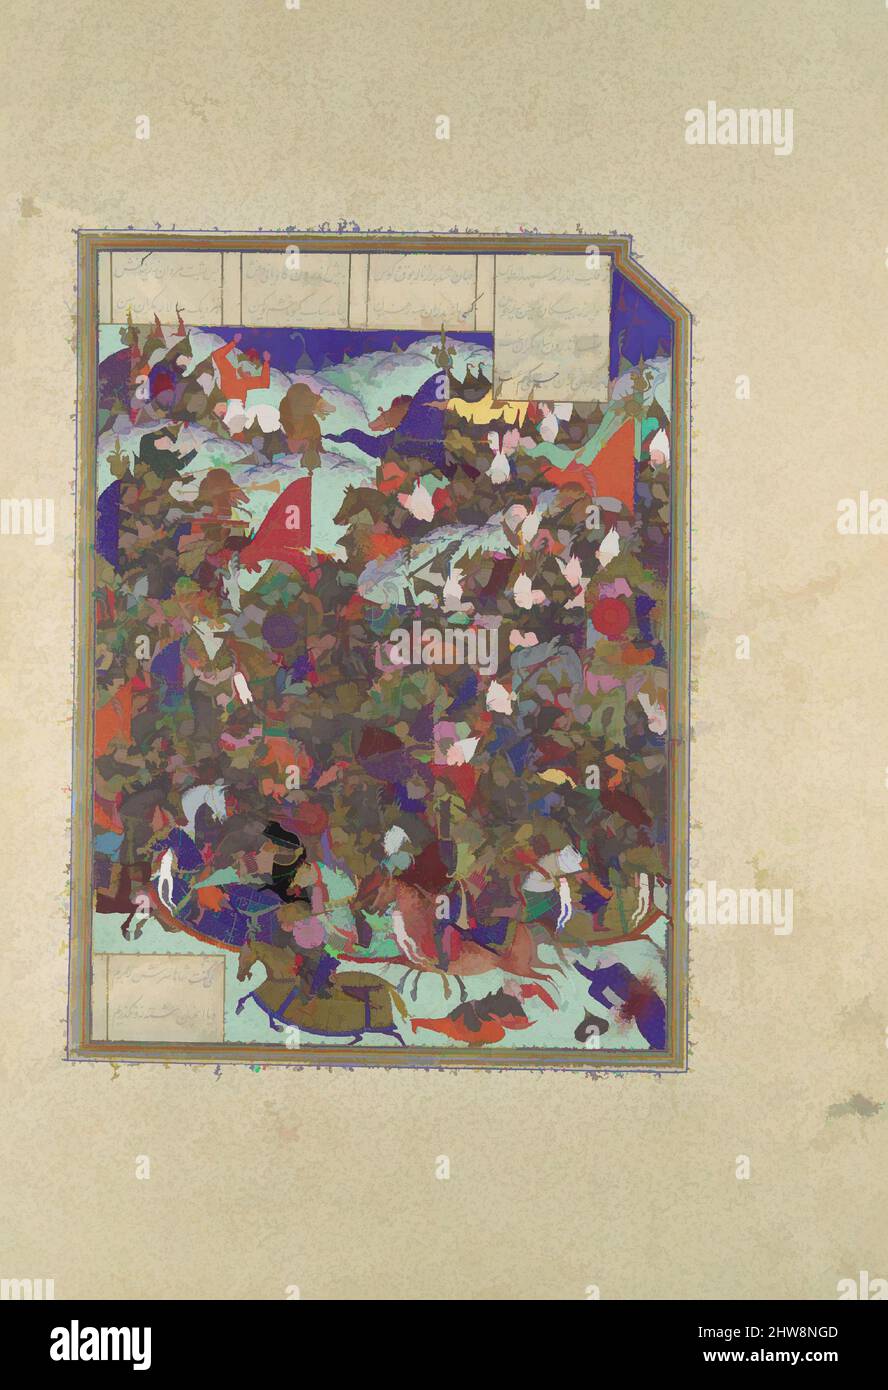 Art inspired by Kai Khusrau Defeats the Army of Makran', Folio 376v from the Shahnama (Book of Kings) of Shah Tahmasp, ca. 1525–30, Made in Iran, Tabriz, Opaque watercolor, ink, silver, and gold on paper, Painting: H. 10 9/16 x W. 7 13/16 in. (H. 26.8 x W. 19.8 cm), Codices, Painting, Classic works modernized by Artotop with a splash of modernity. Shapes, color and value, eye-catching visual impact on art. Emotions through freedom of artworks in a contemporary way. A timeless message pursuing a wildly creative new direction. Artists turning to the digital medium and creating the Artotop NFT Stock Photo